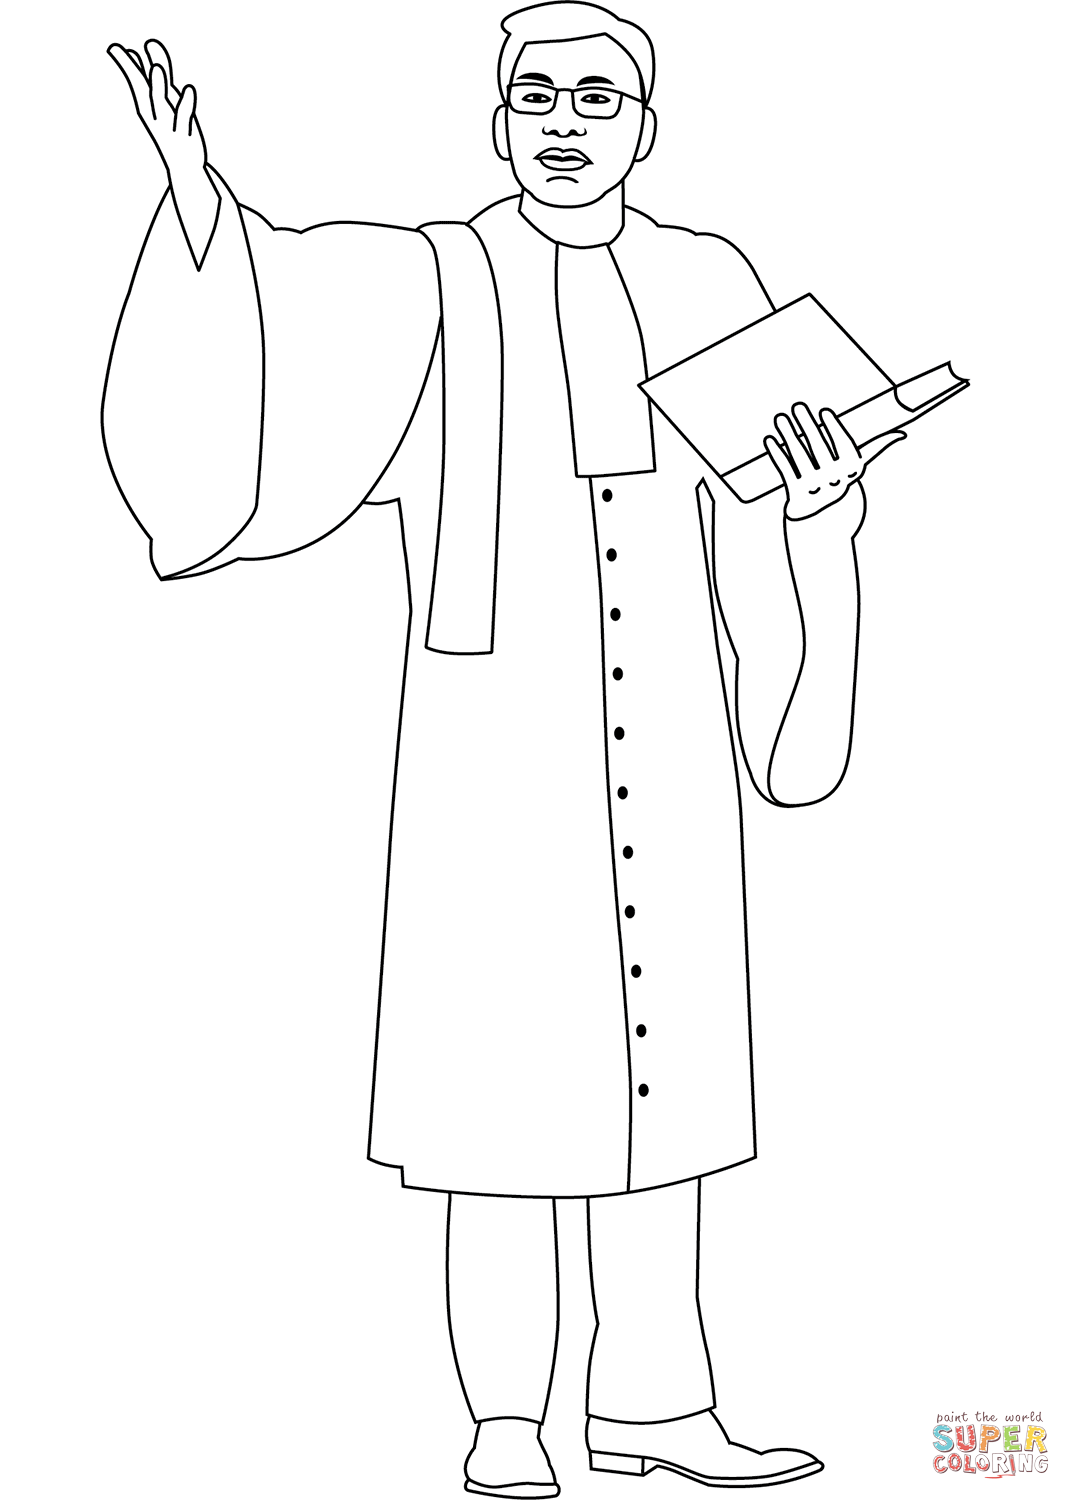 Lawyer coloring page free printable coloring pages